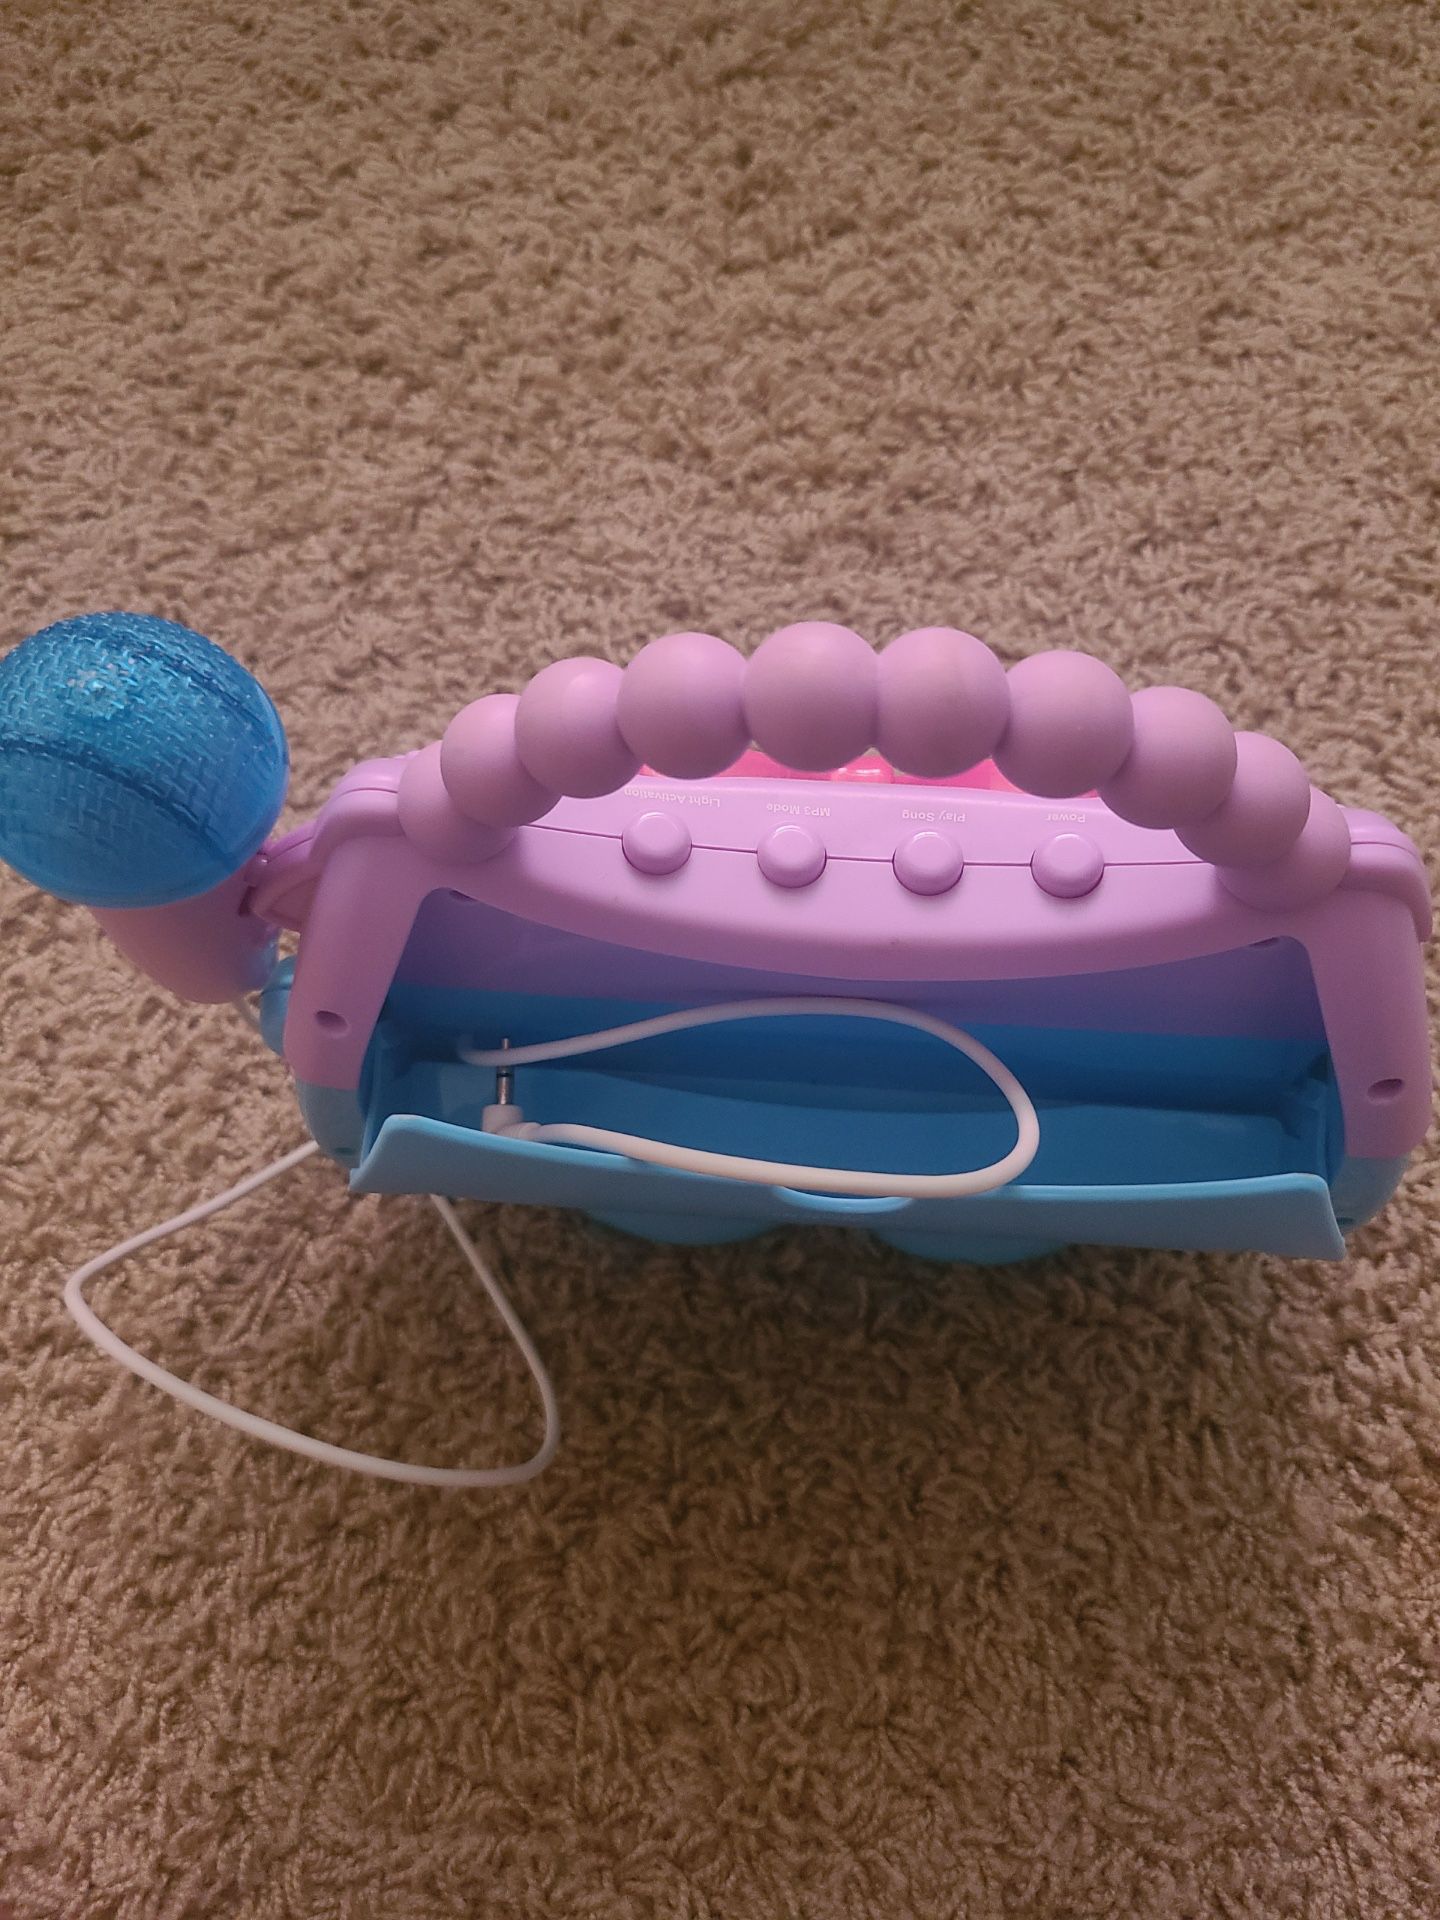 Shopkins Sing Along Boom Box With Microphone 